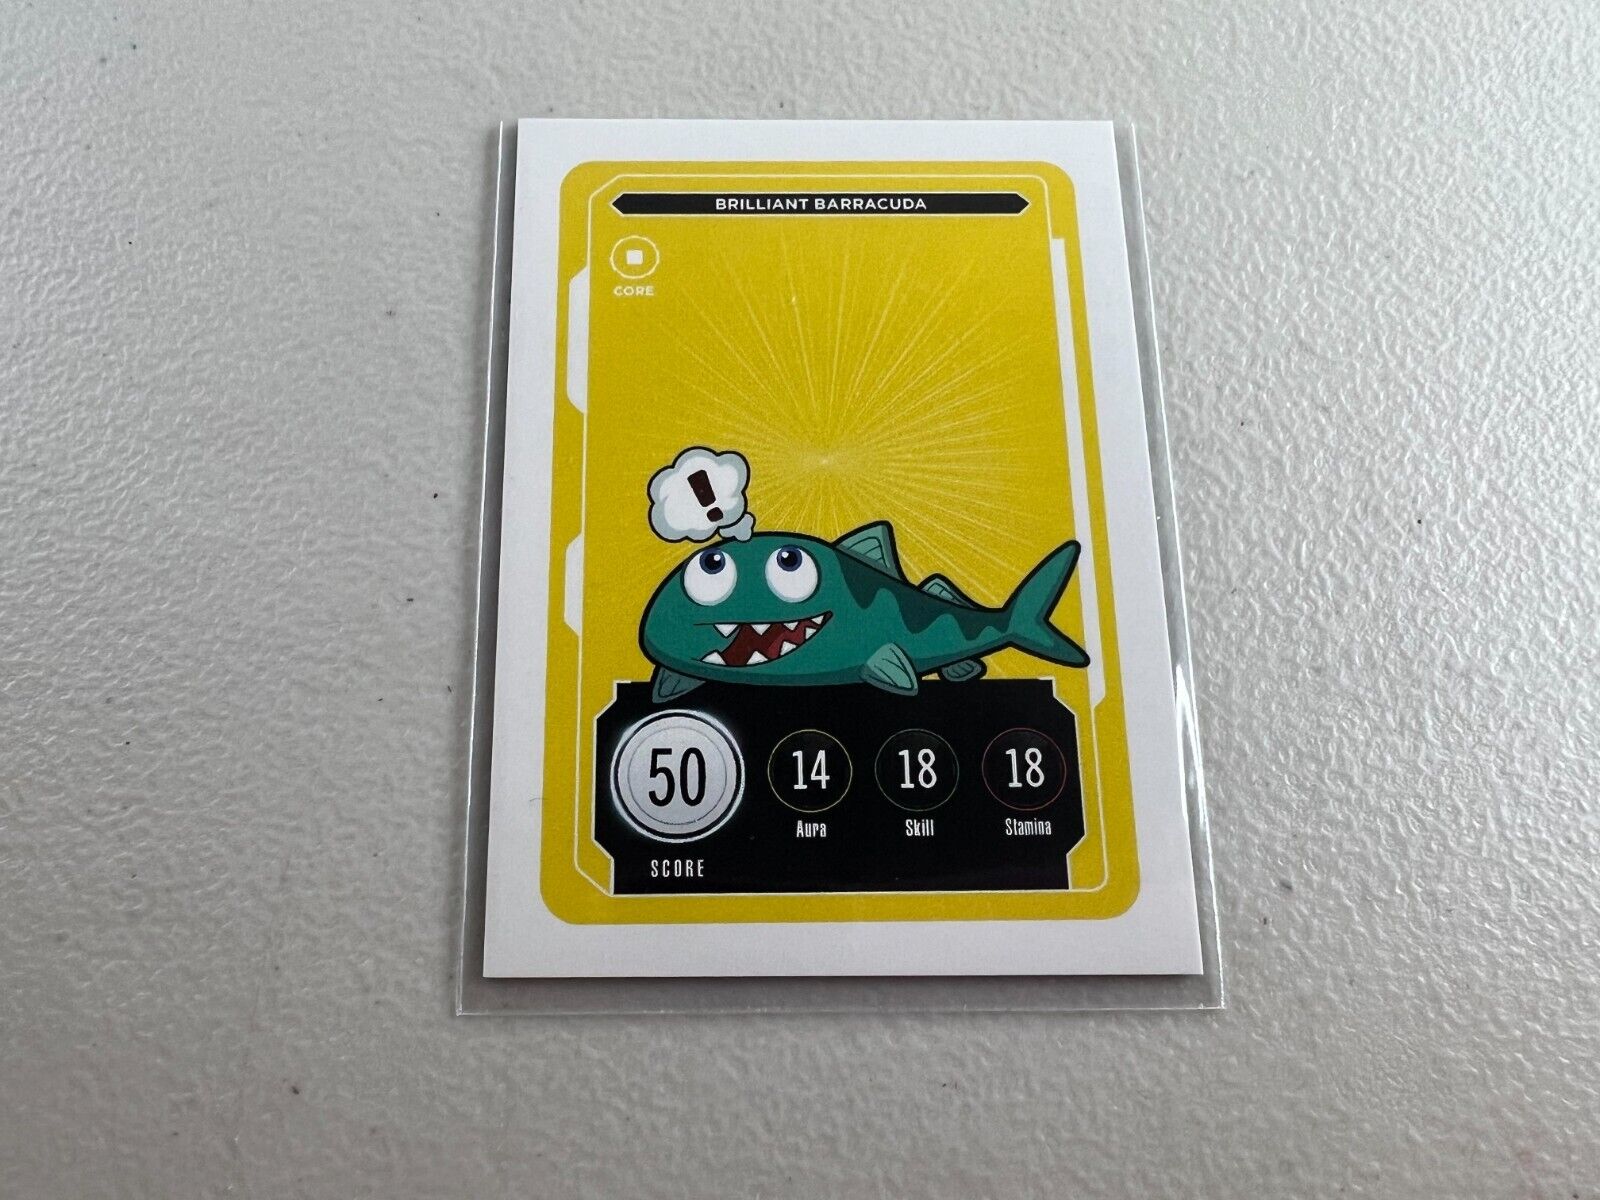 Brilliant Barracuda VeeFriends Series 2 Compete and Collect Core Card Gary Vee